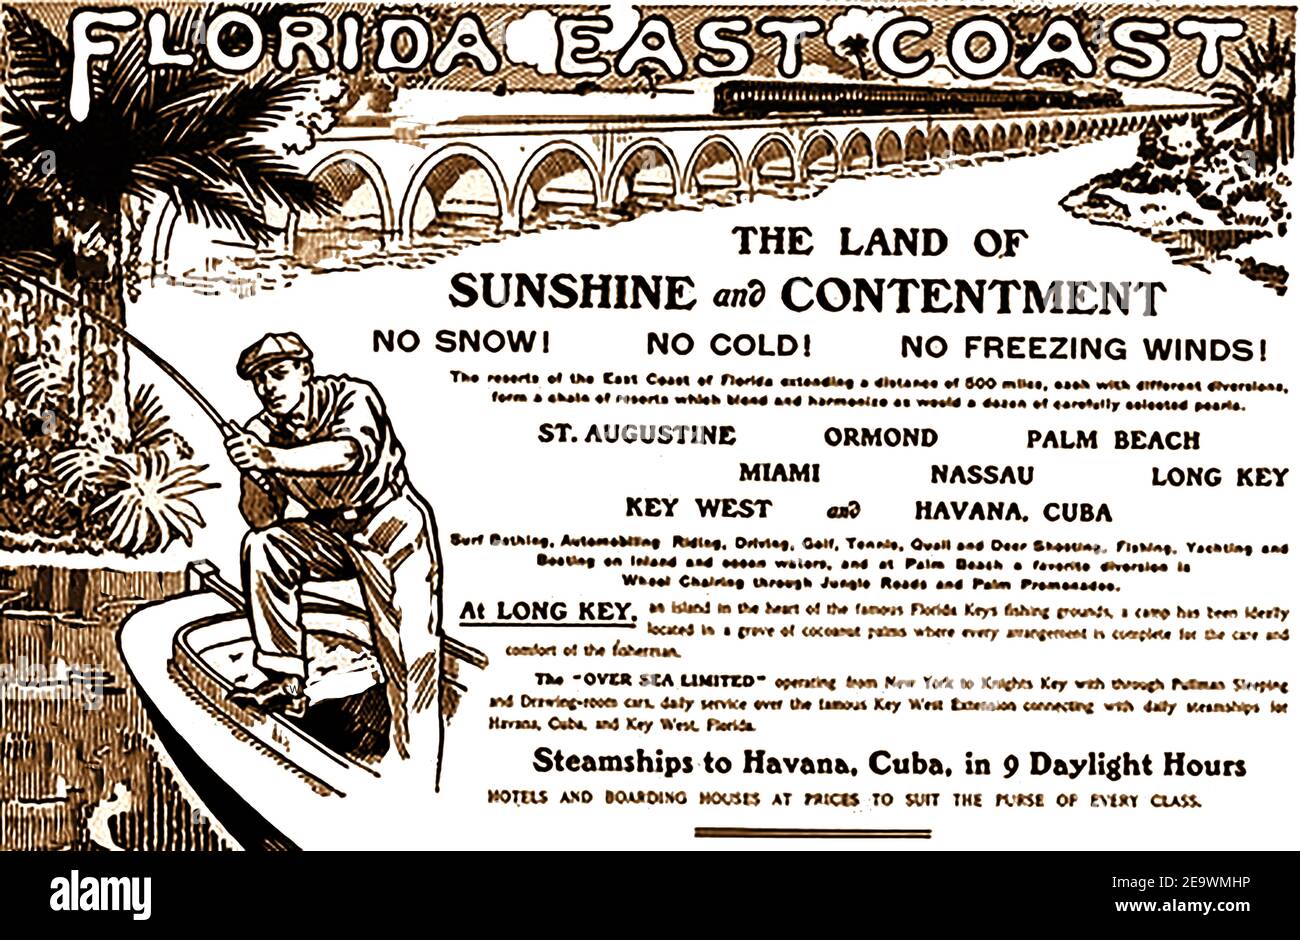 1909 BUFFALO LOCAL NEWSPAPER ADVERTISEMENT TO TOURISTS FOR LOCALS TO VISIT THE FLORIDA EAST COAST. Stock Photo